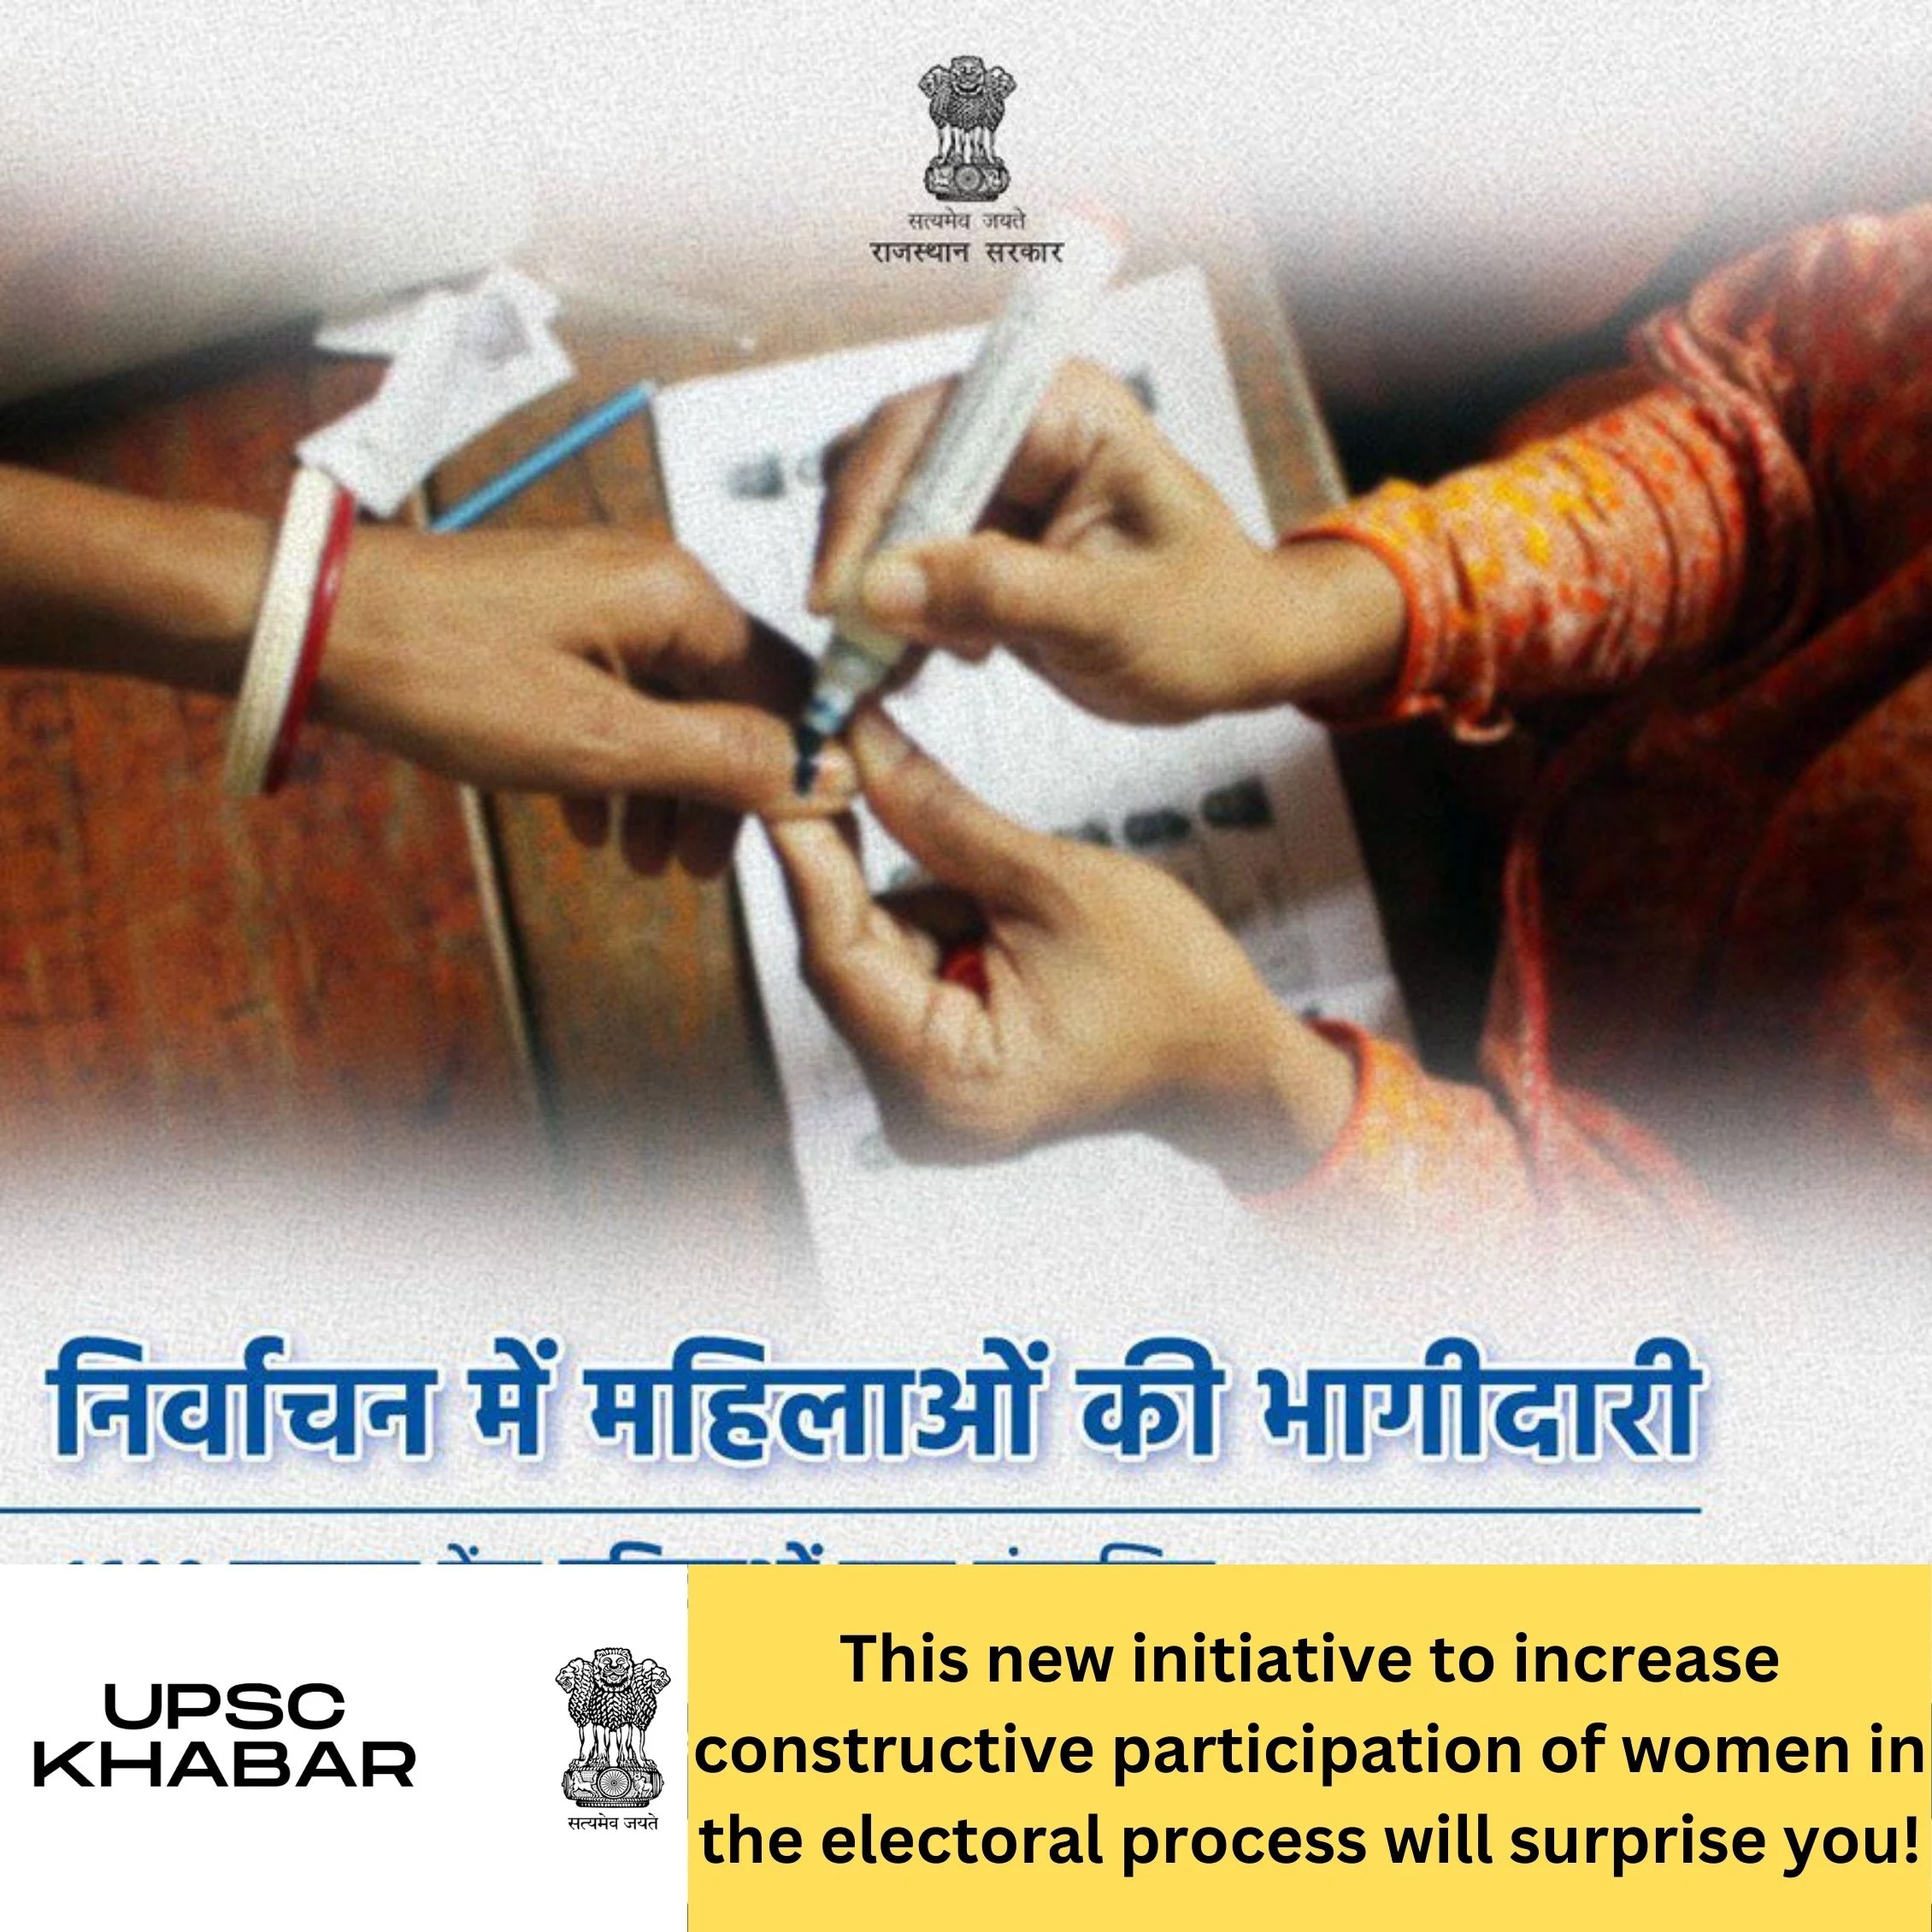 This new initiative to increase constructive participation of women in the electoral process will surprise you!